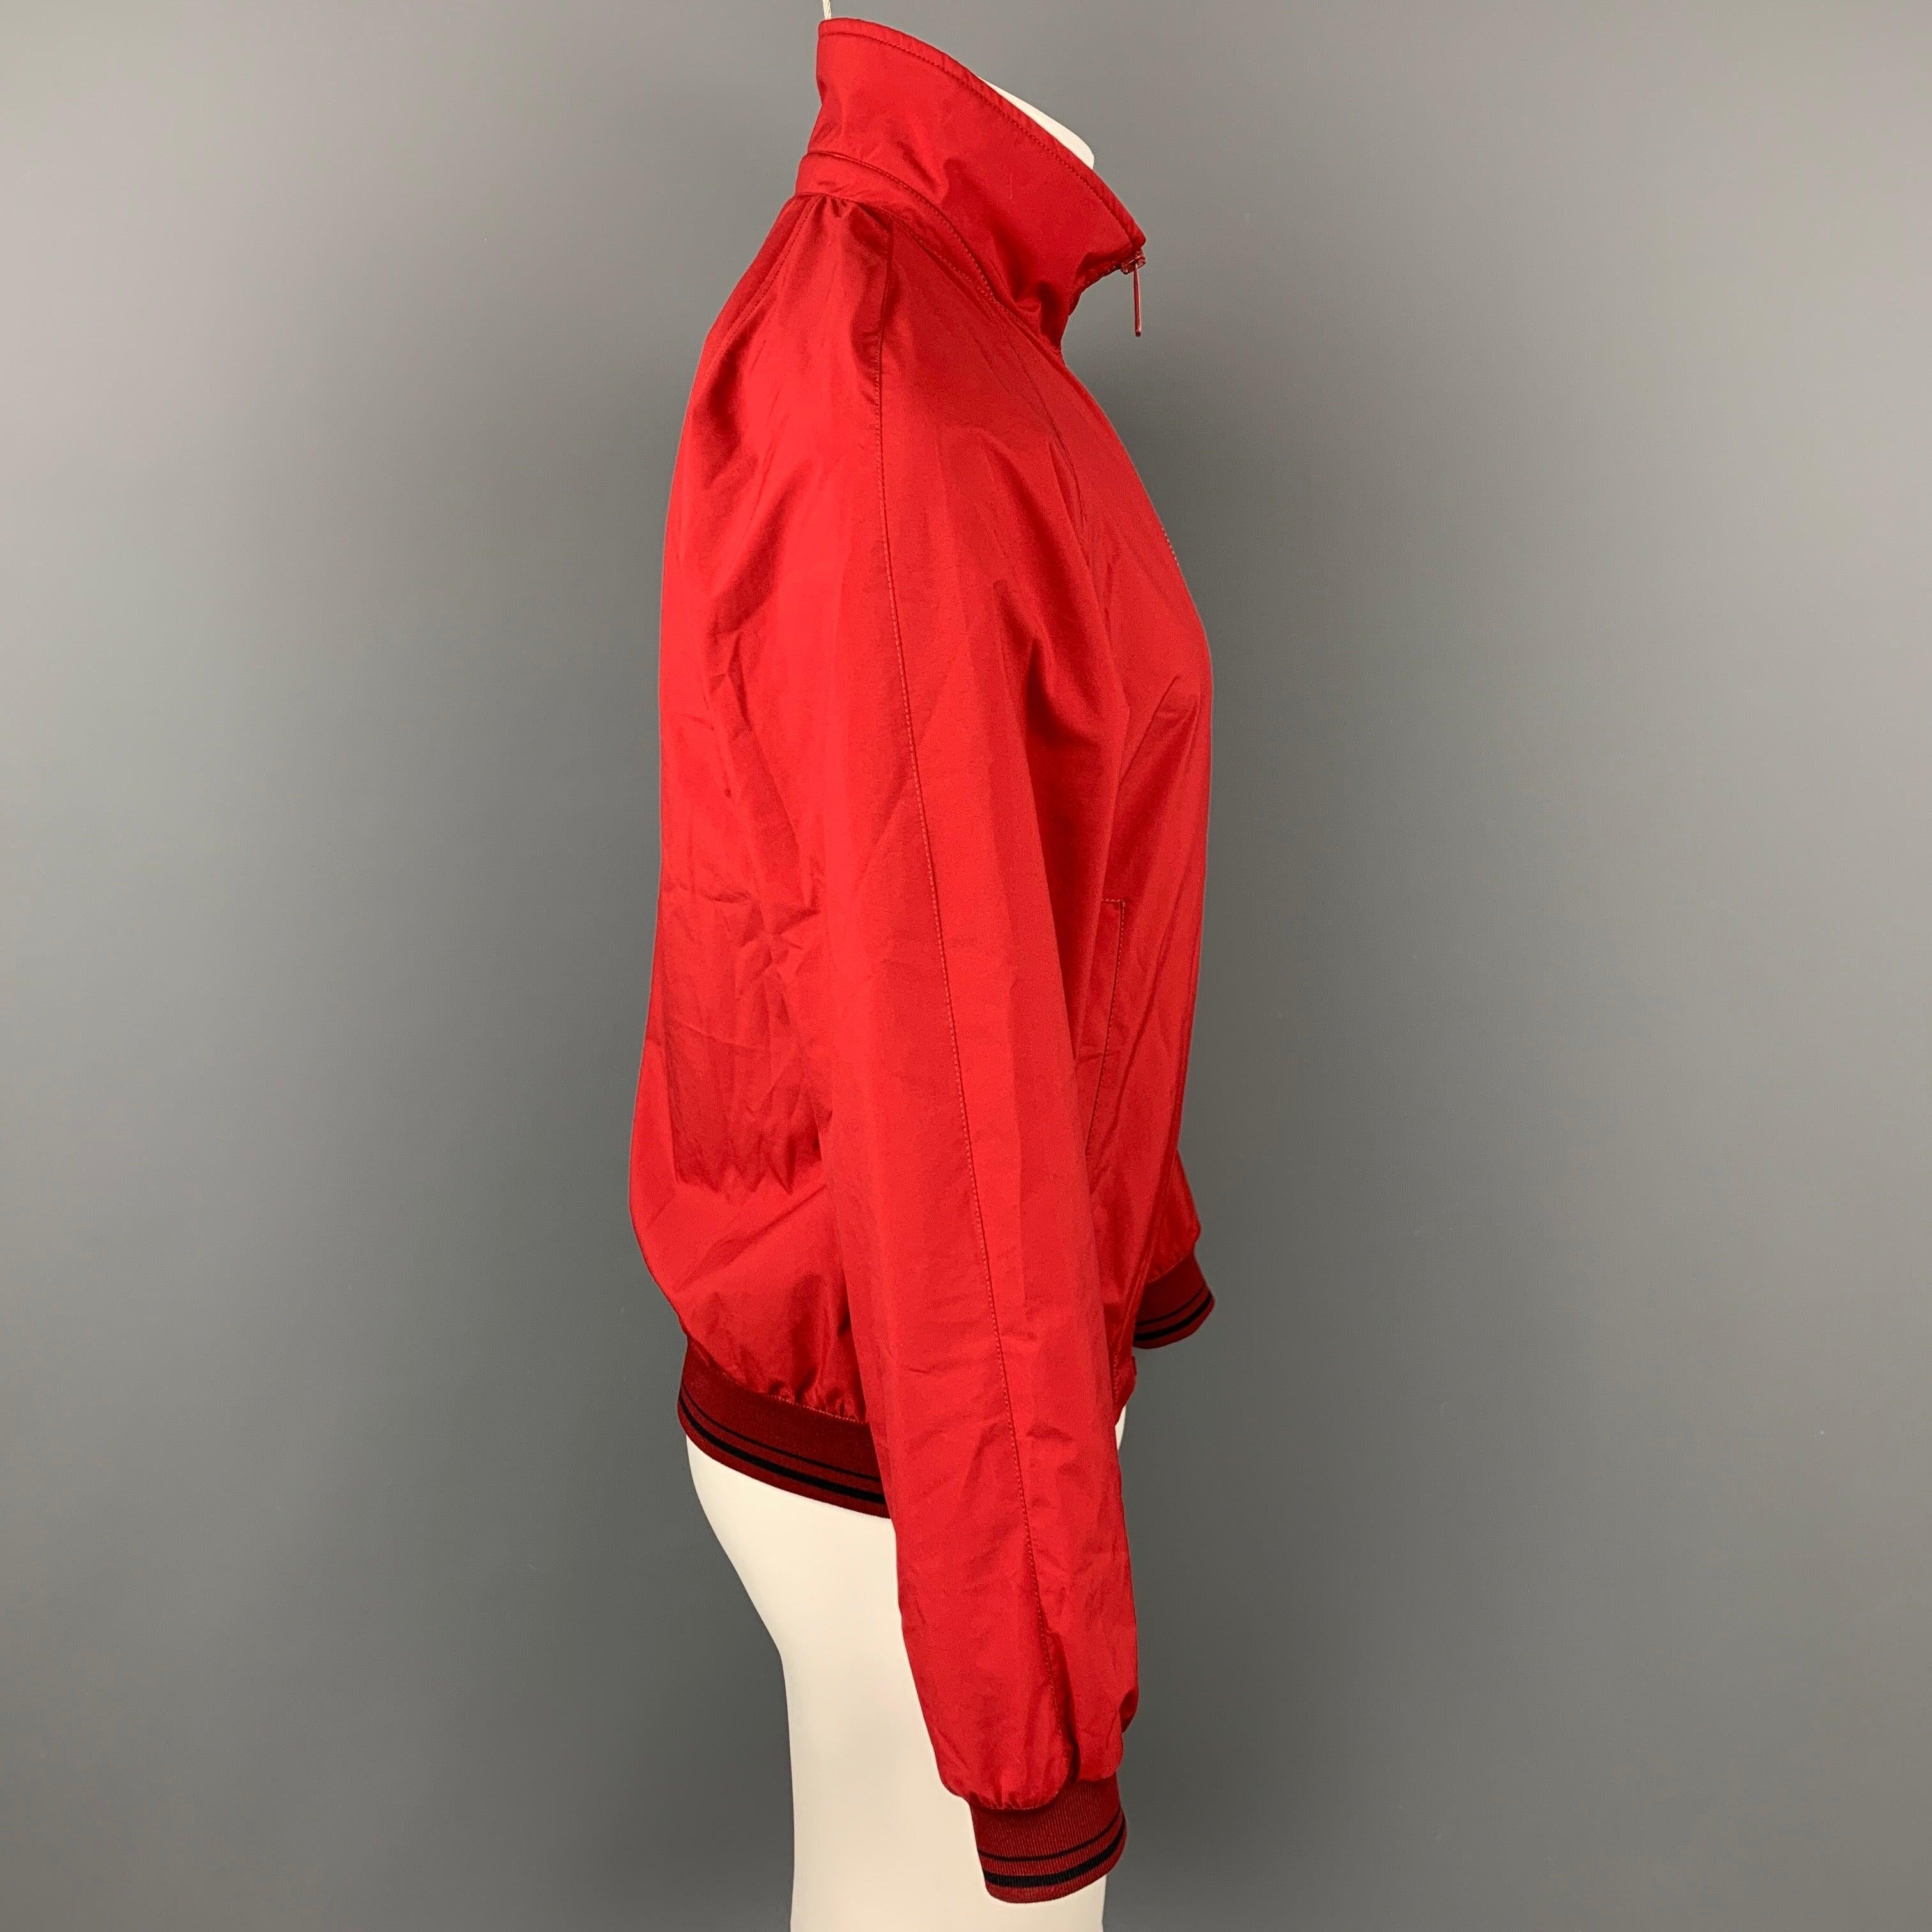 PRADA jacket comes in a red polyester with a mesh liner featuring a windbreaker style, ribbed hem, front logo, and a zip up closure.Good
 Pre-Owned Condition. 
 

 Marked:  46 
 

 Measurements: 
  
 Shoulder: 17 inches Chest: 41 inches Sleeve: 25.5